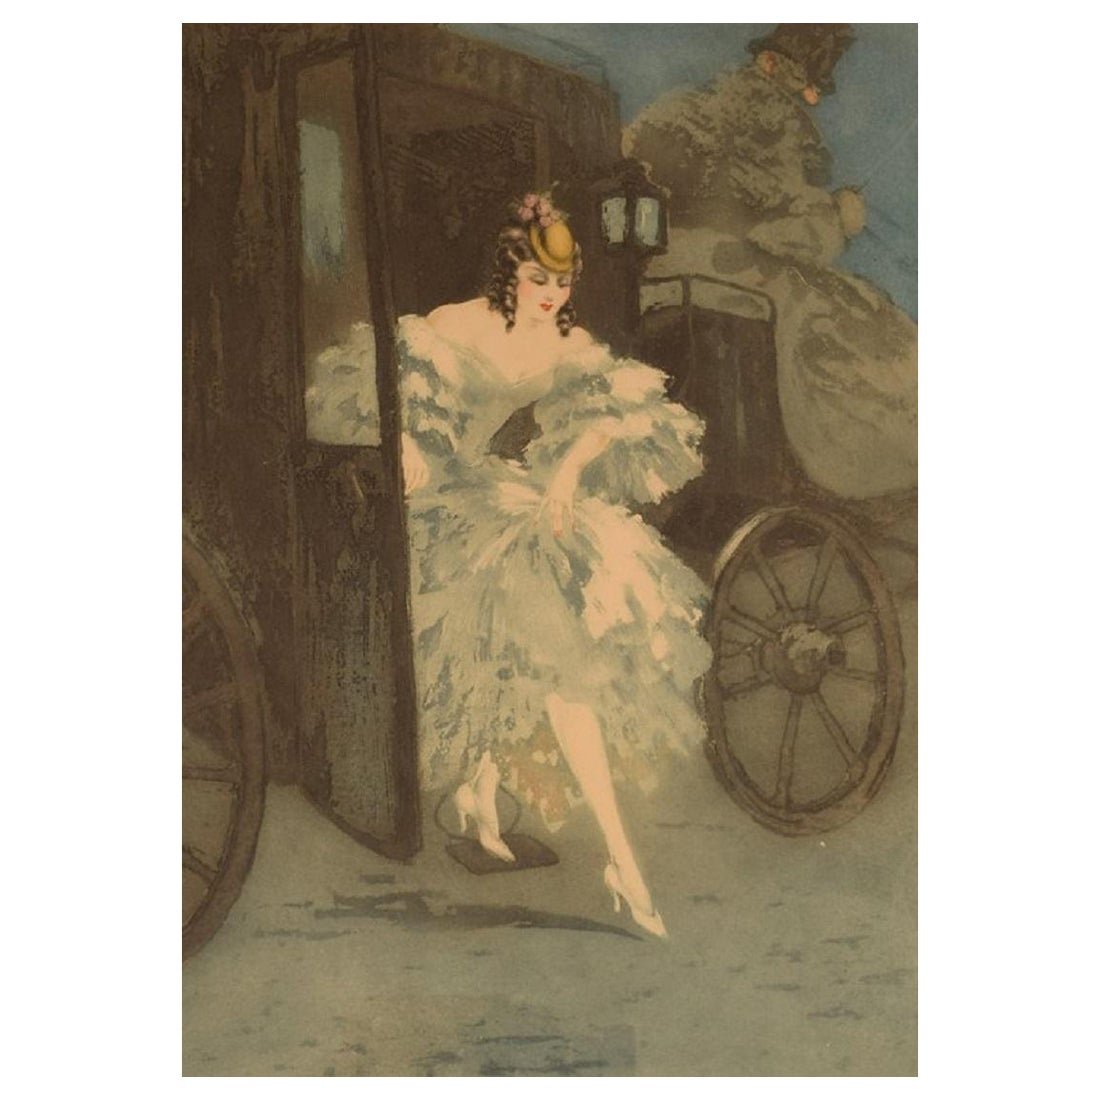 Louis Icart, Etching on Paper, "Arrival", Approx. 1920 For Sale